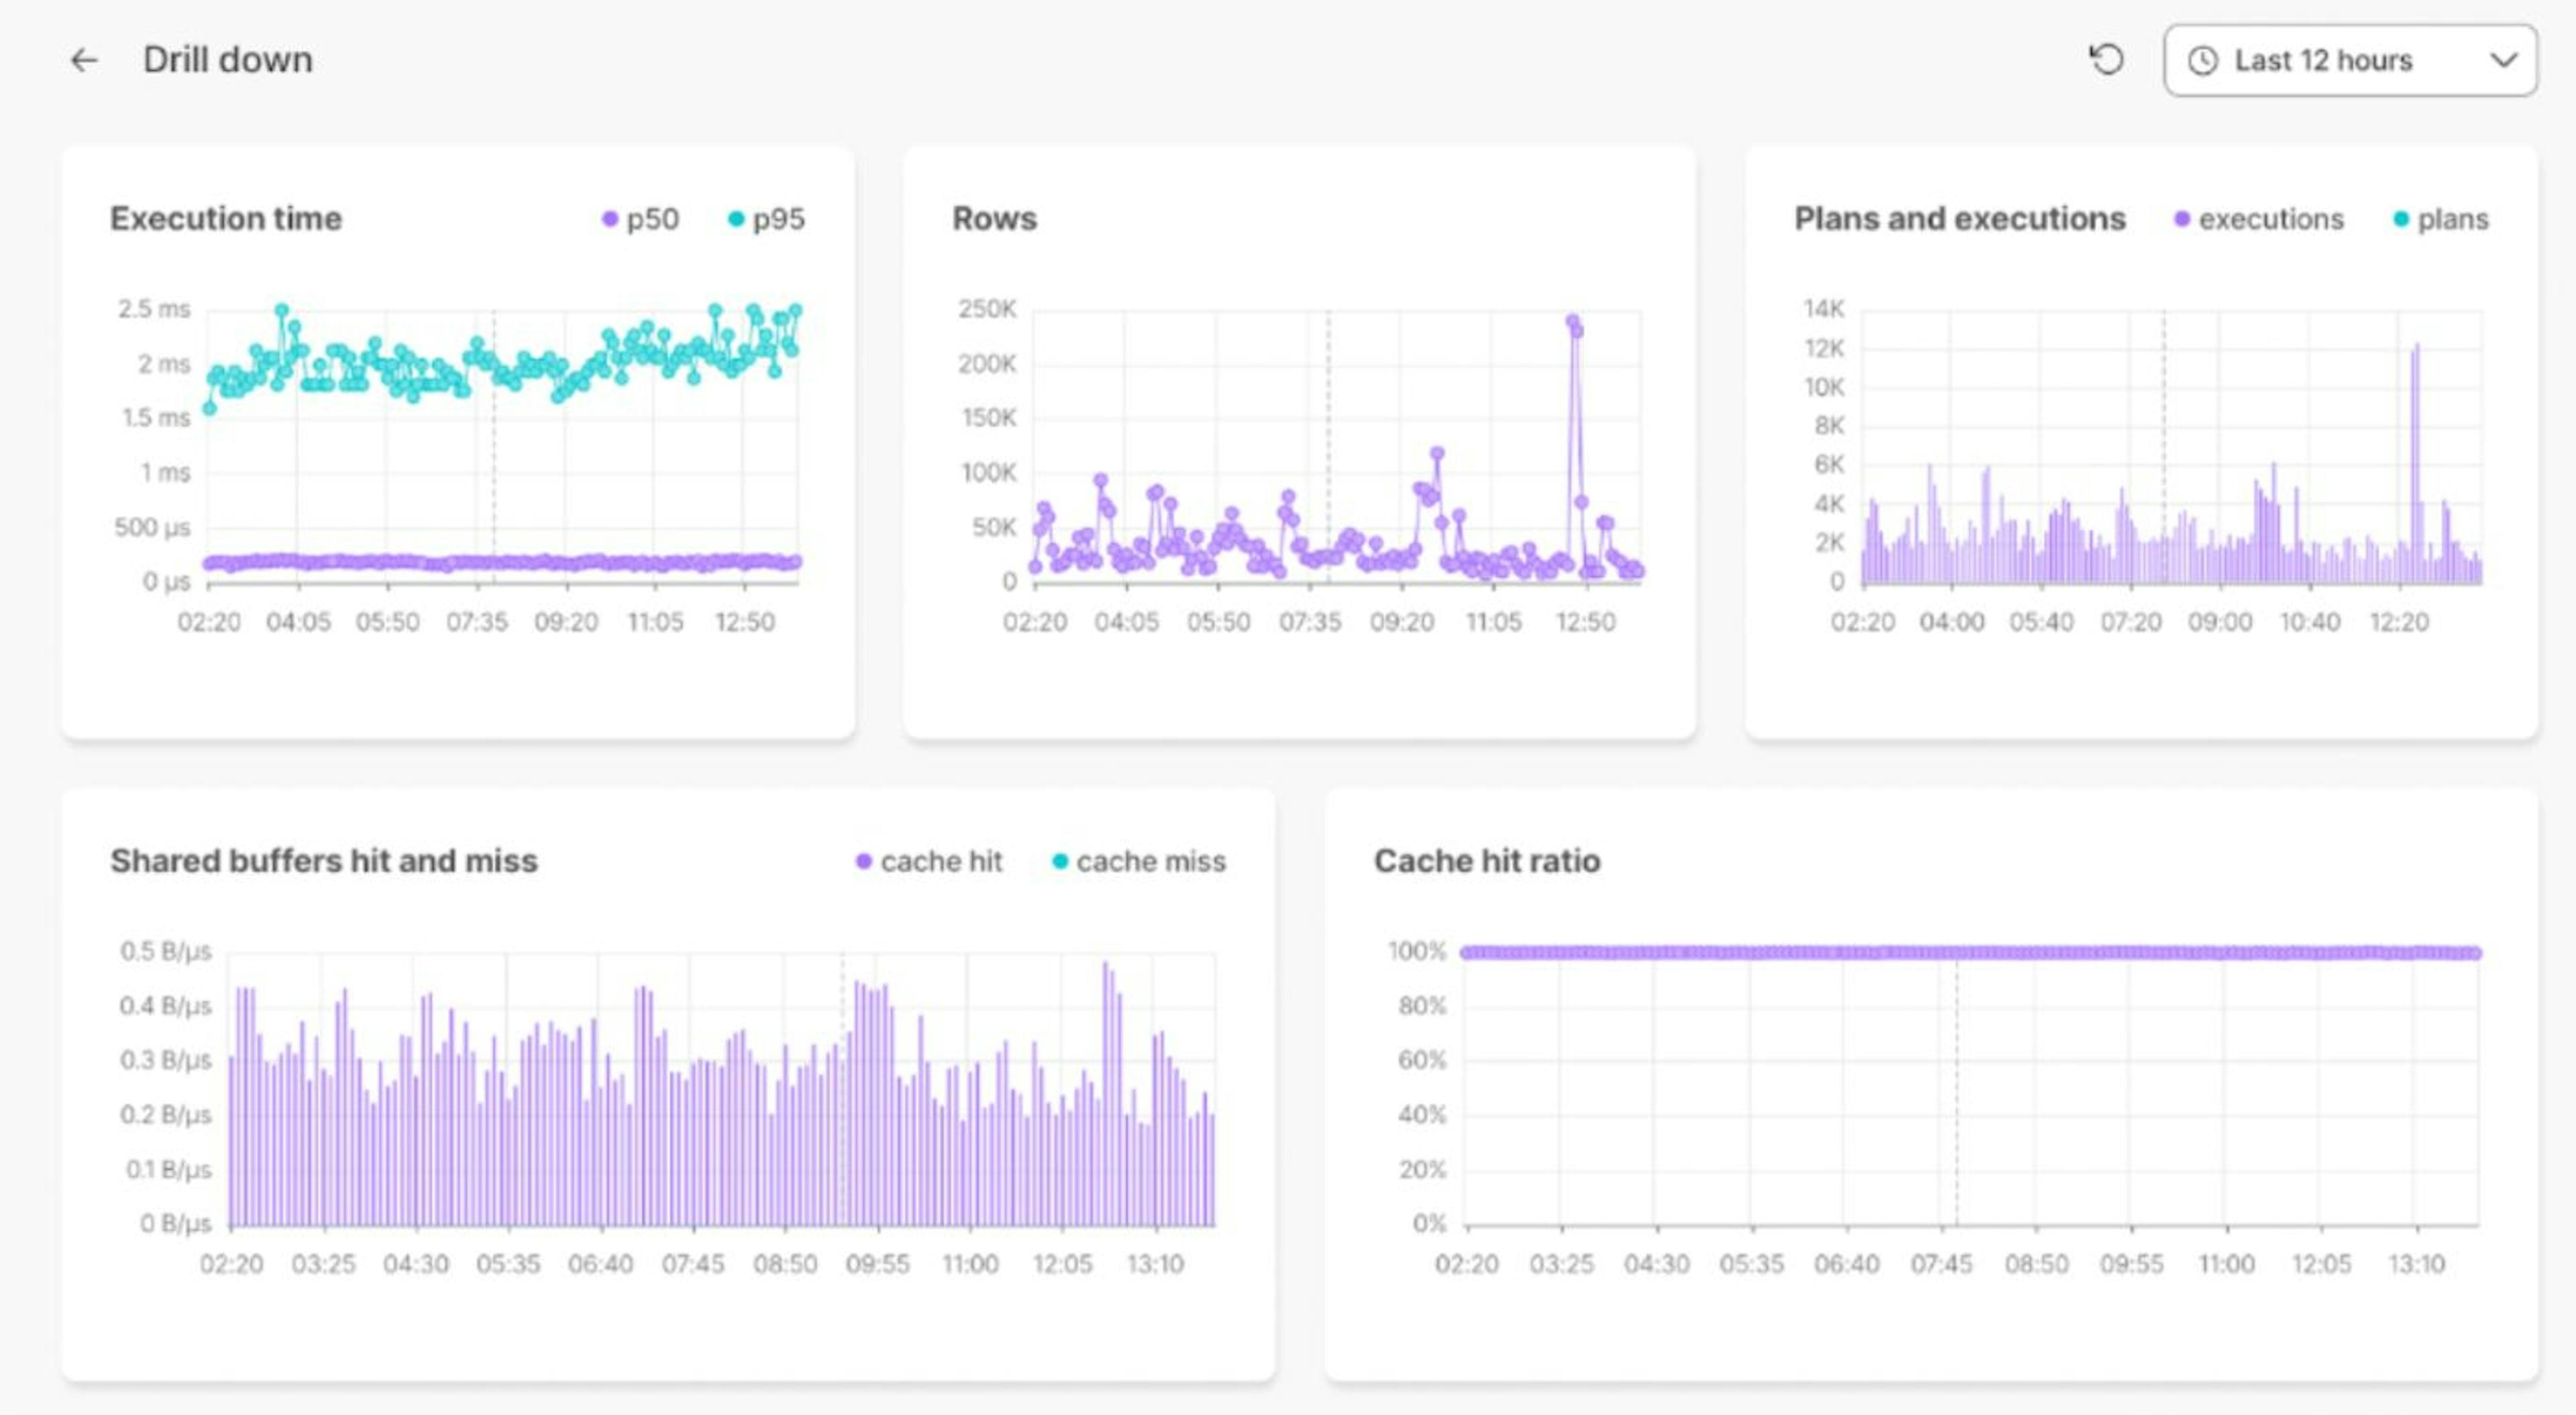 Insights collects information about query latency, CPU, memory, I/O, shared buffers, and other metrics across all Timescale databases, ingesting billions of records per day. These customer-facing dashboards are also powered by a standard database service running on the Timescale platform.